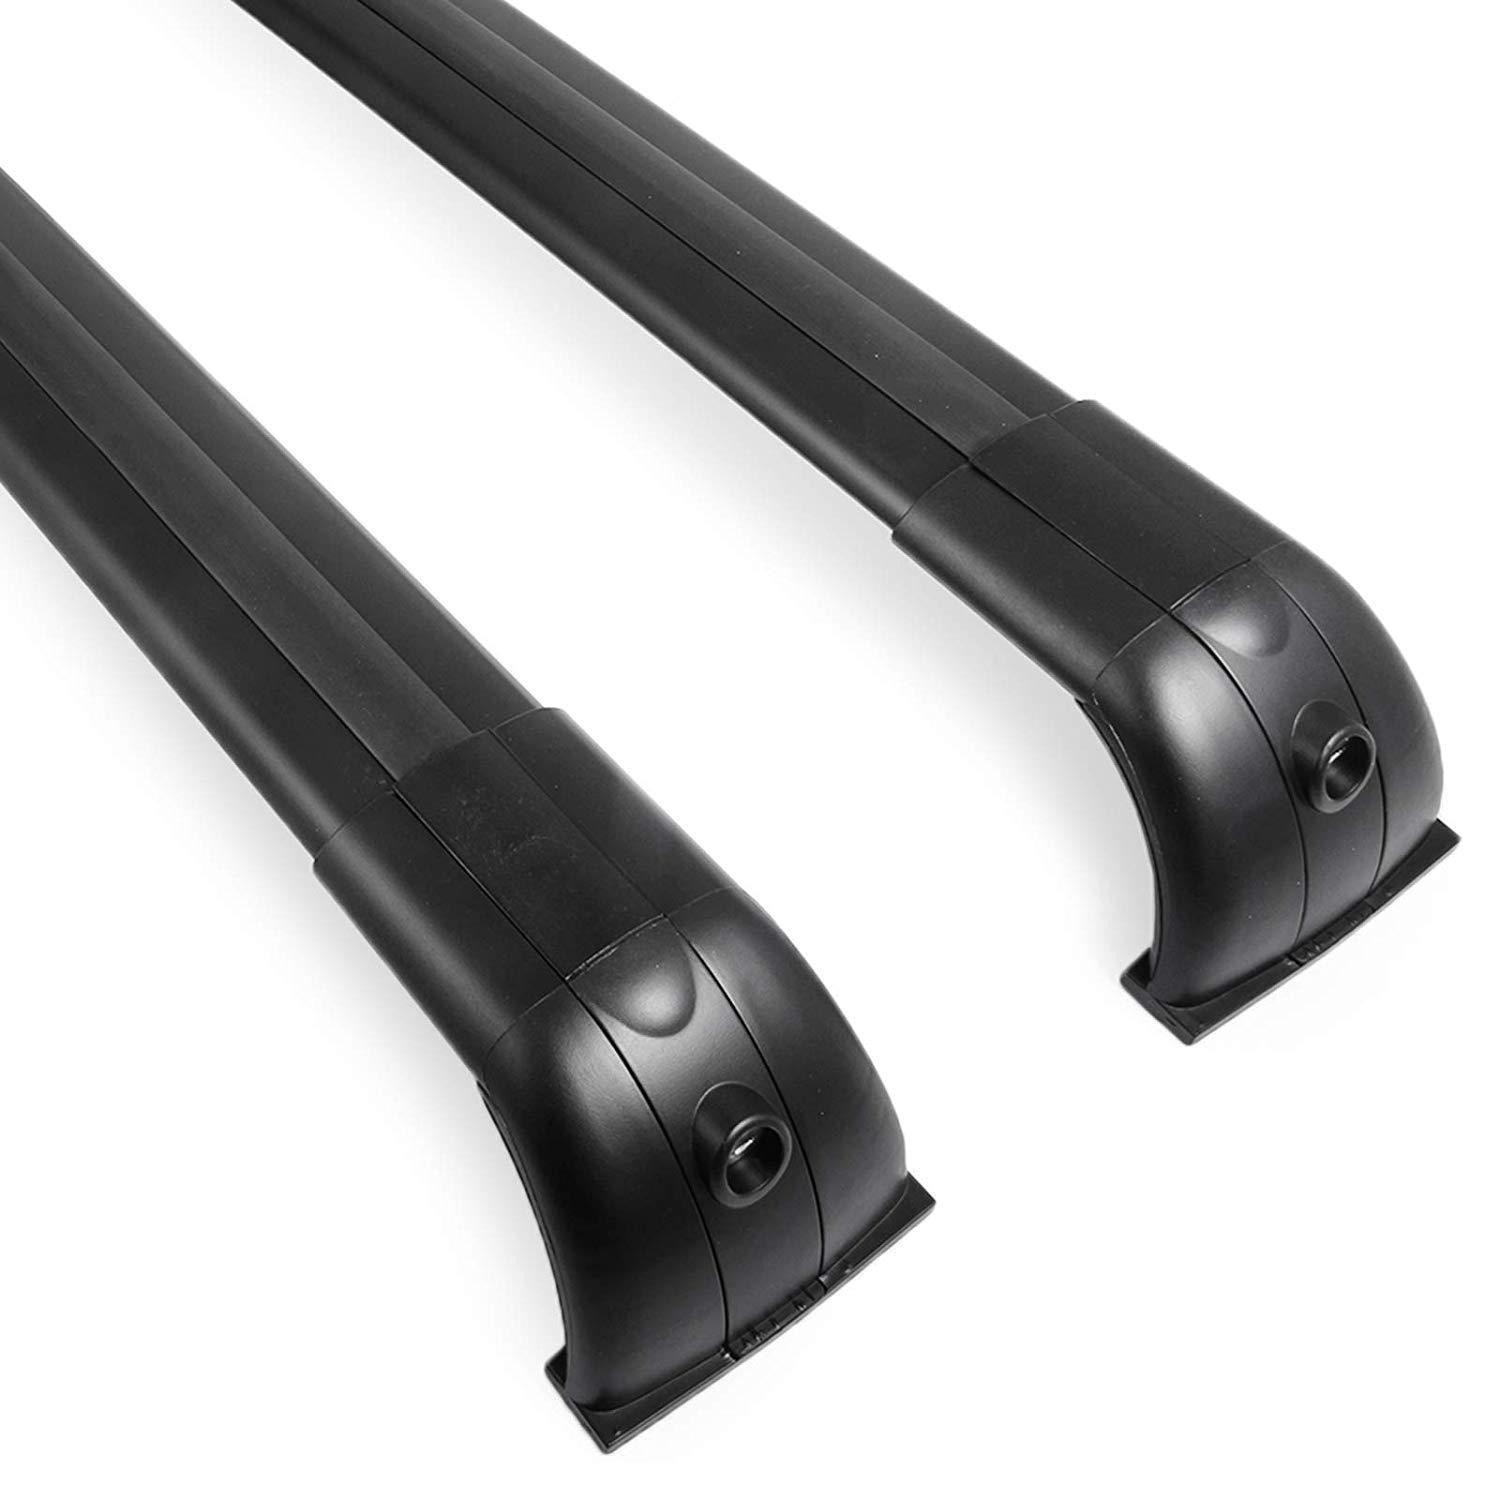 LAND ROVER DISCOVERY 3 / 4 OE STYLE CROSS BARS - BLACK - PAIR - Storm Xccessories2